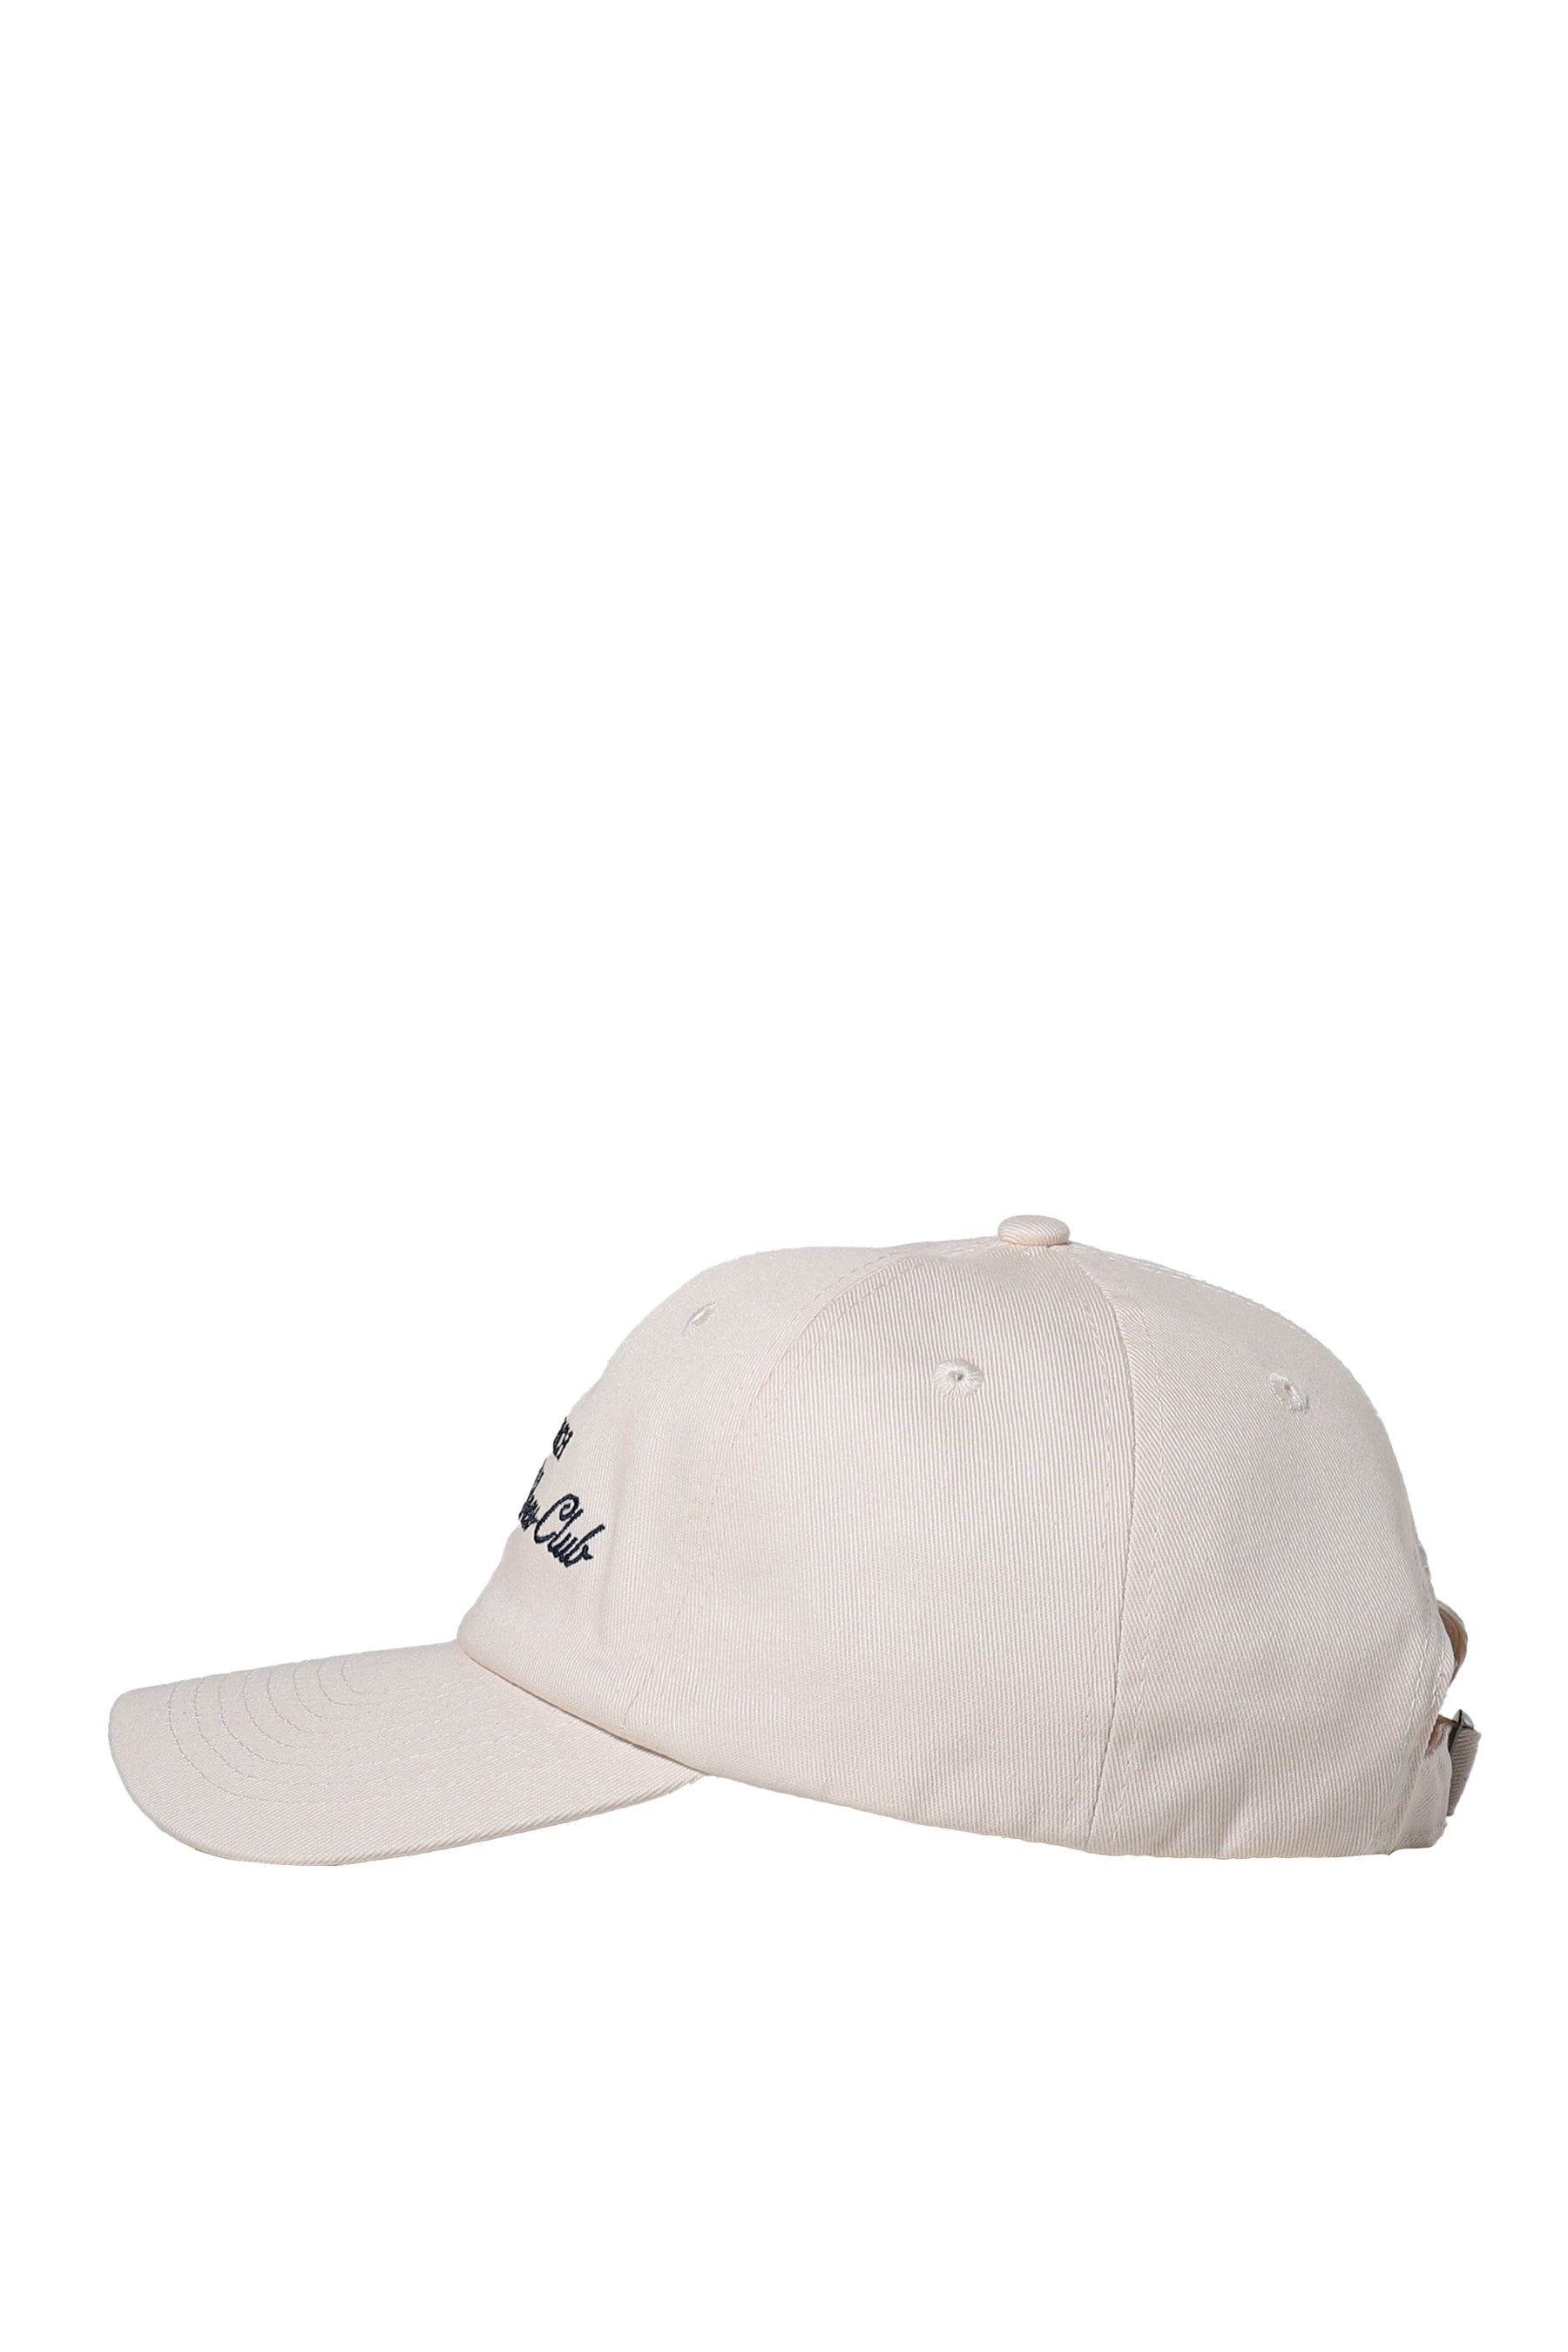 H&W CLUB EMBROIDERED HAT / CRM